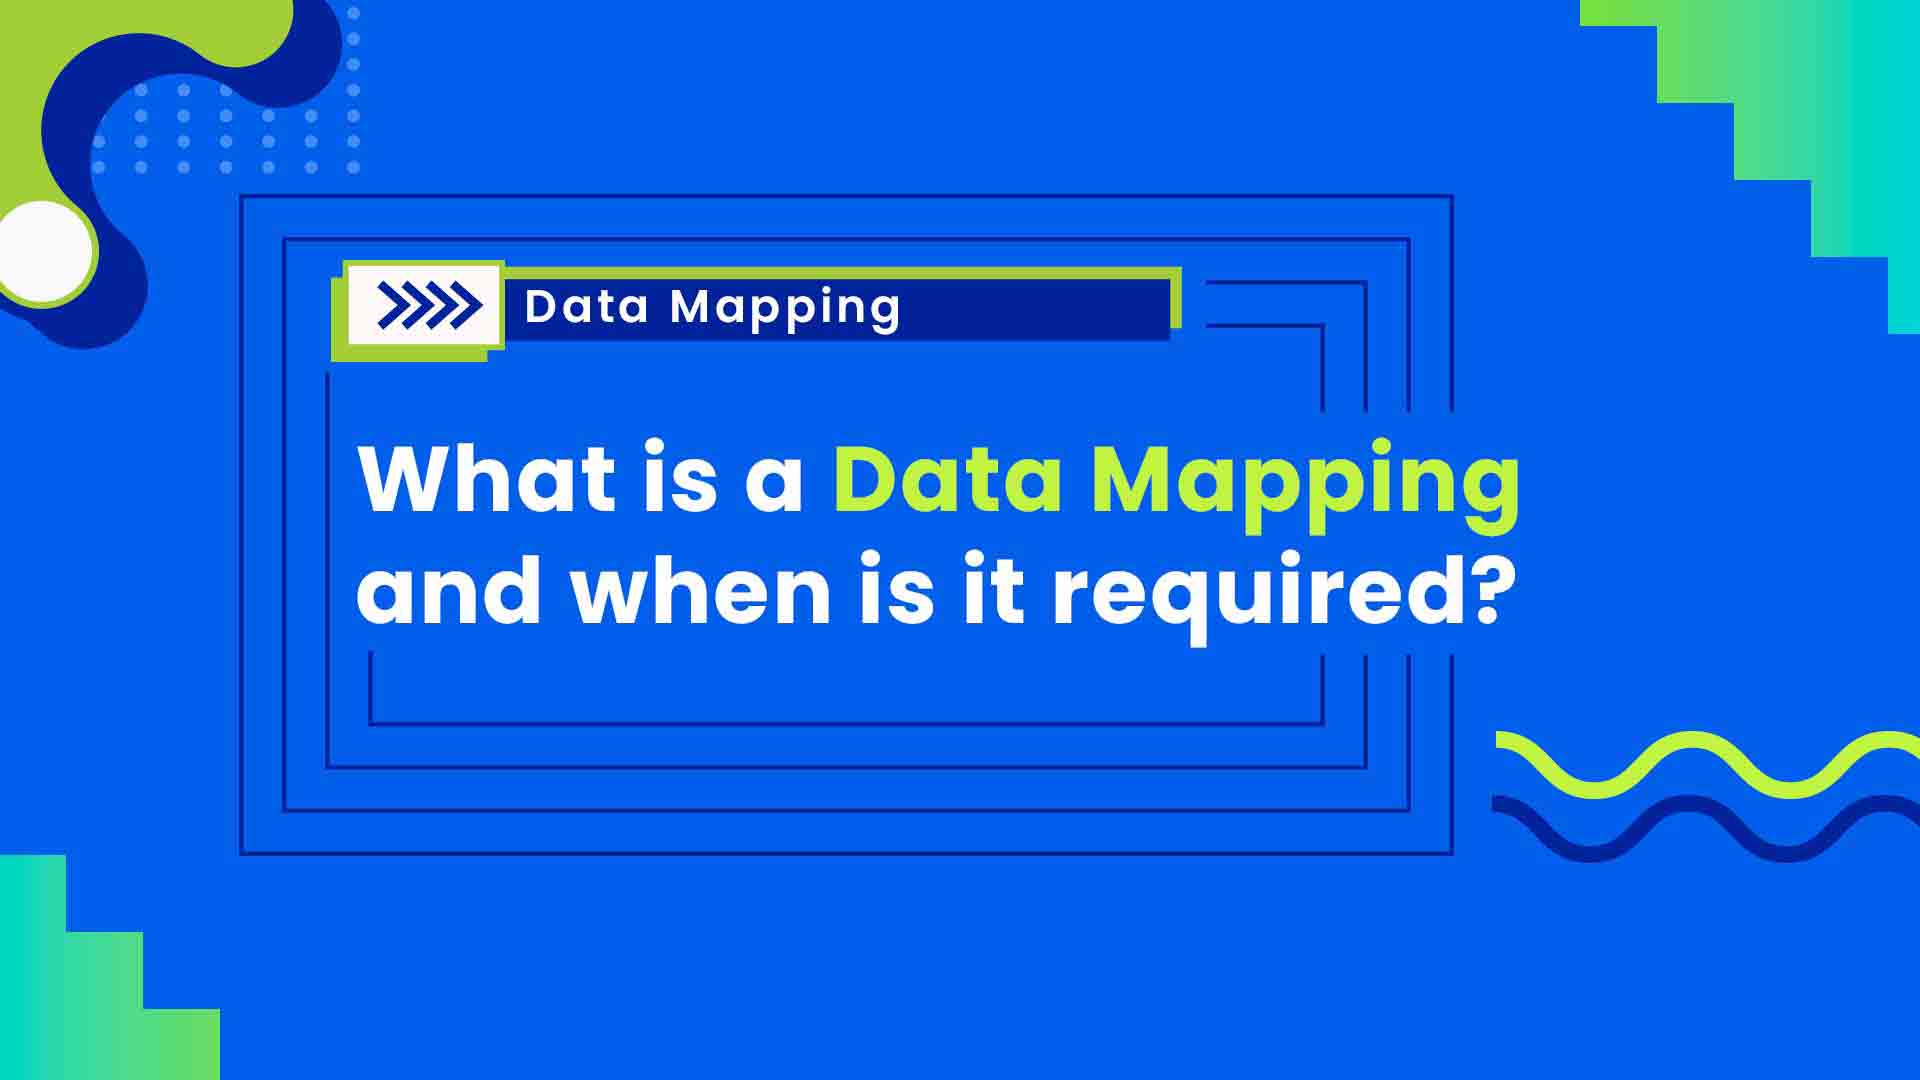 1. What is Data Mapping